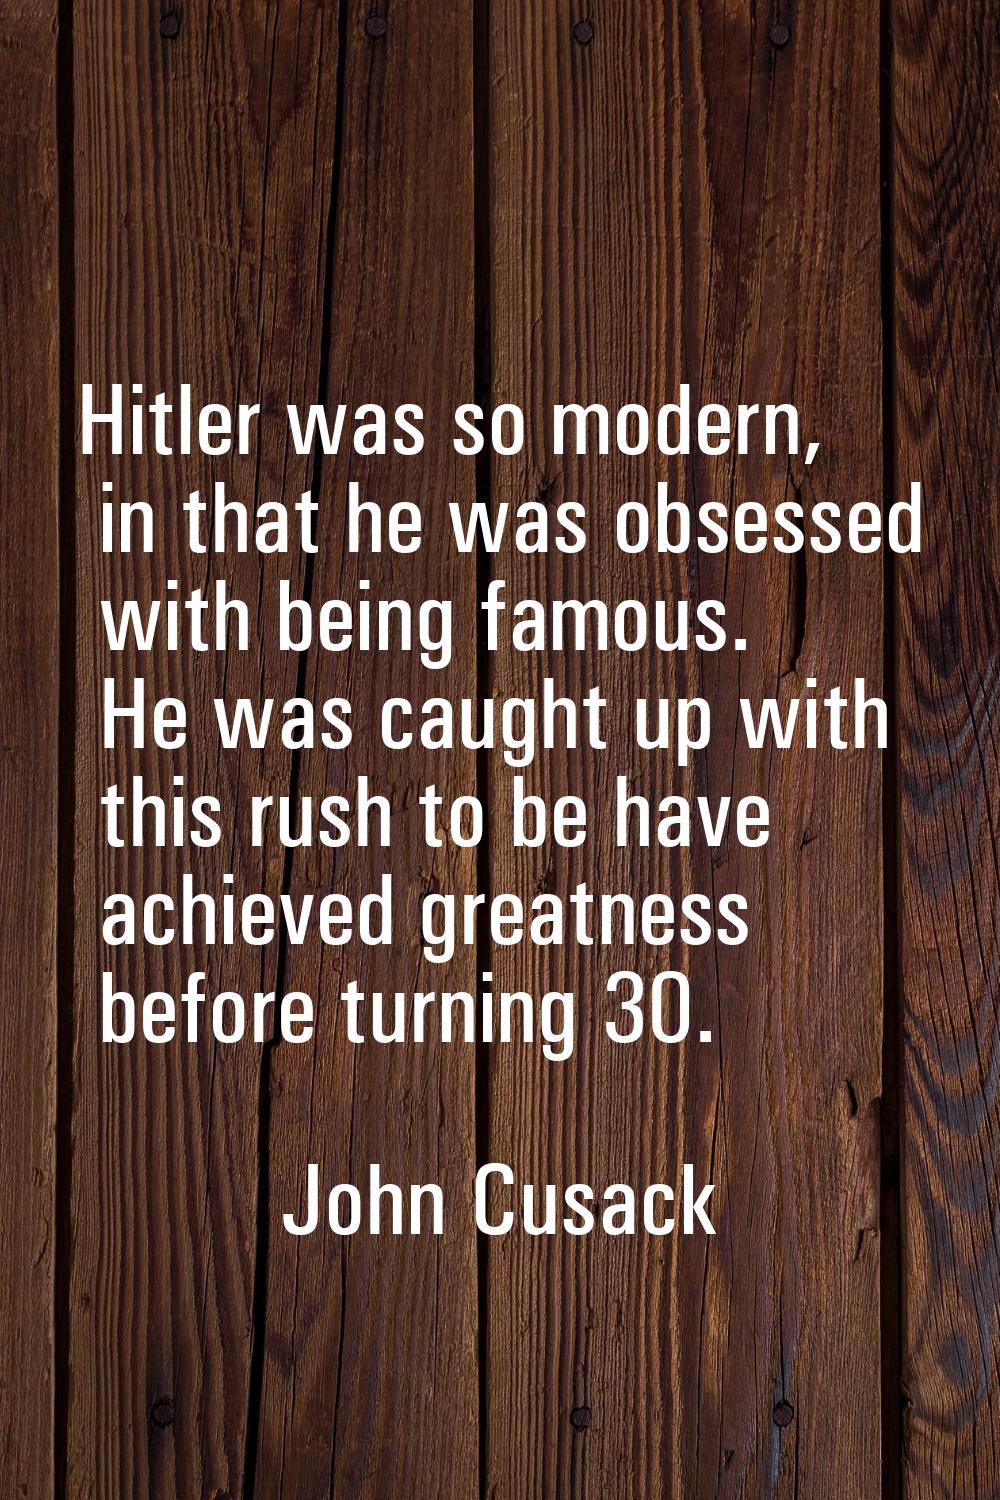 Hitler was so modern, in that he was obsessed with being famous. He was caught up with this rush to